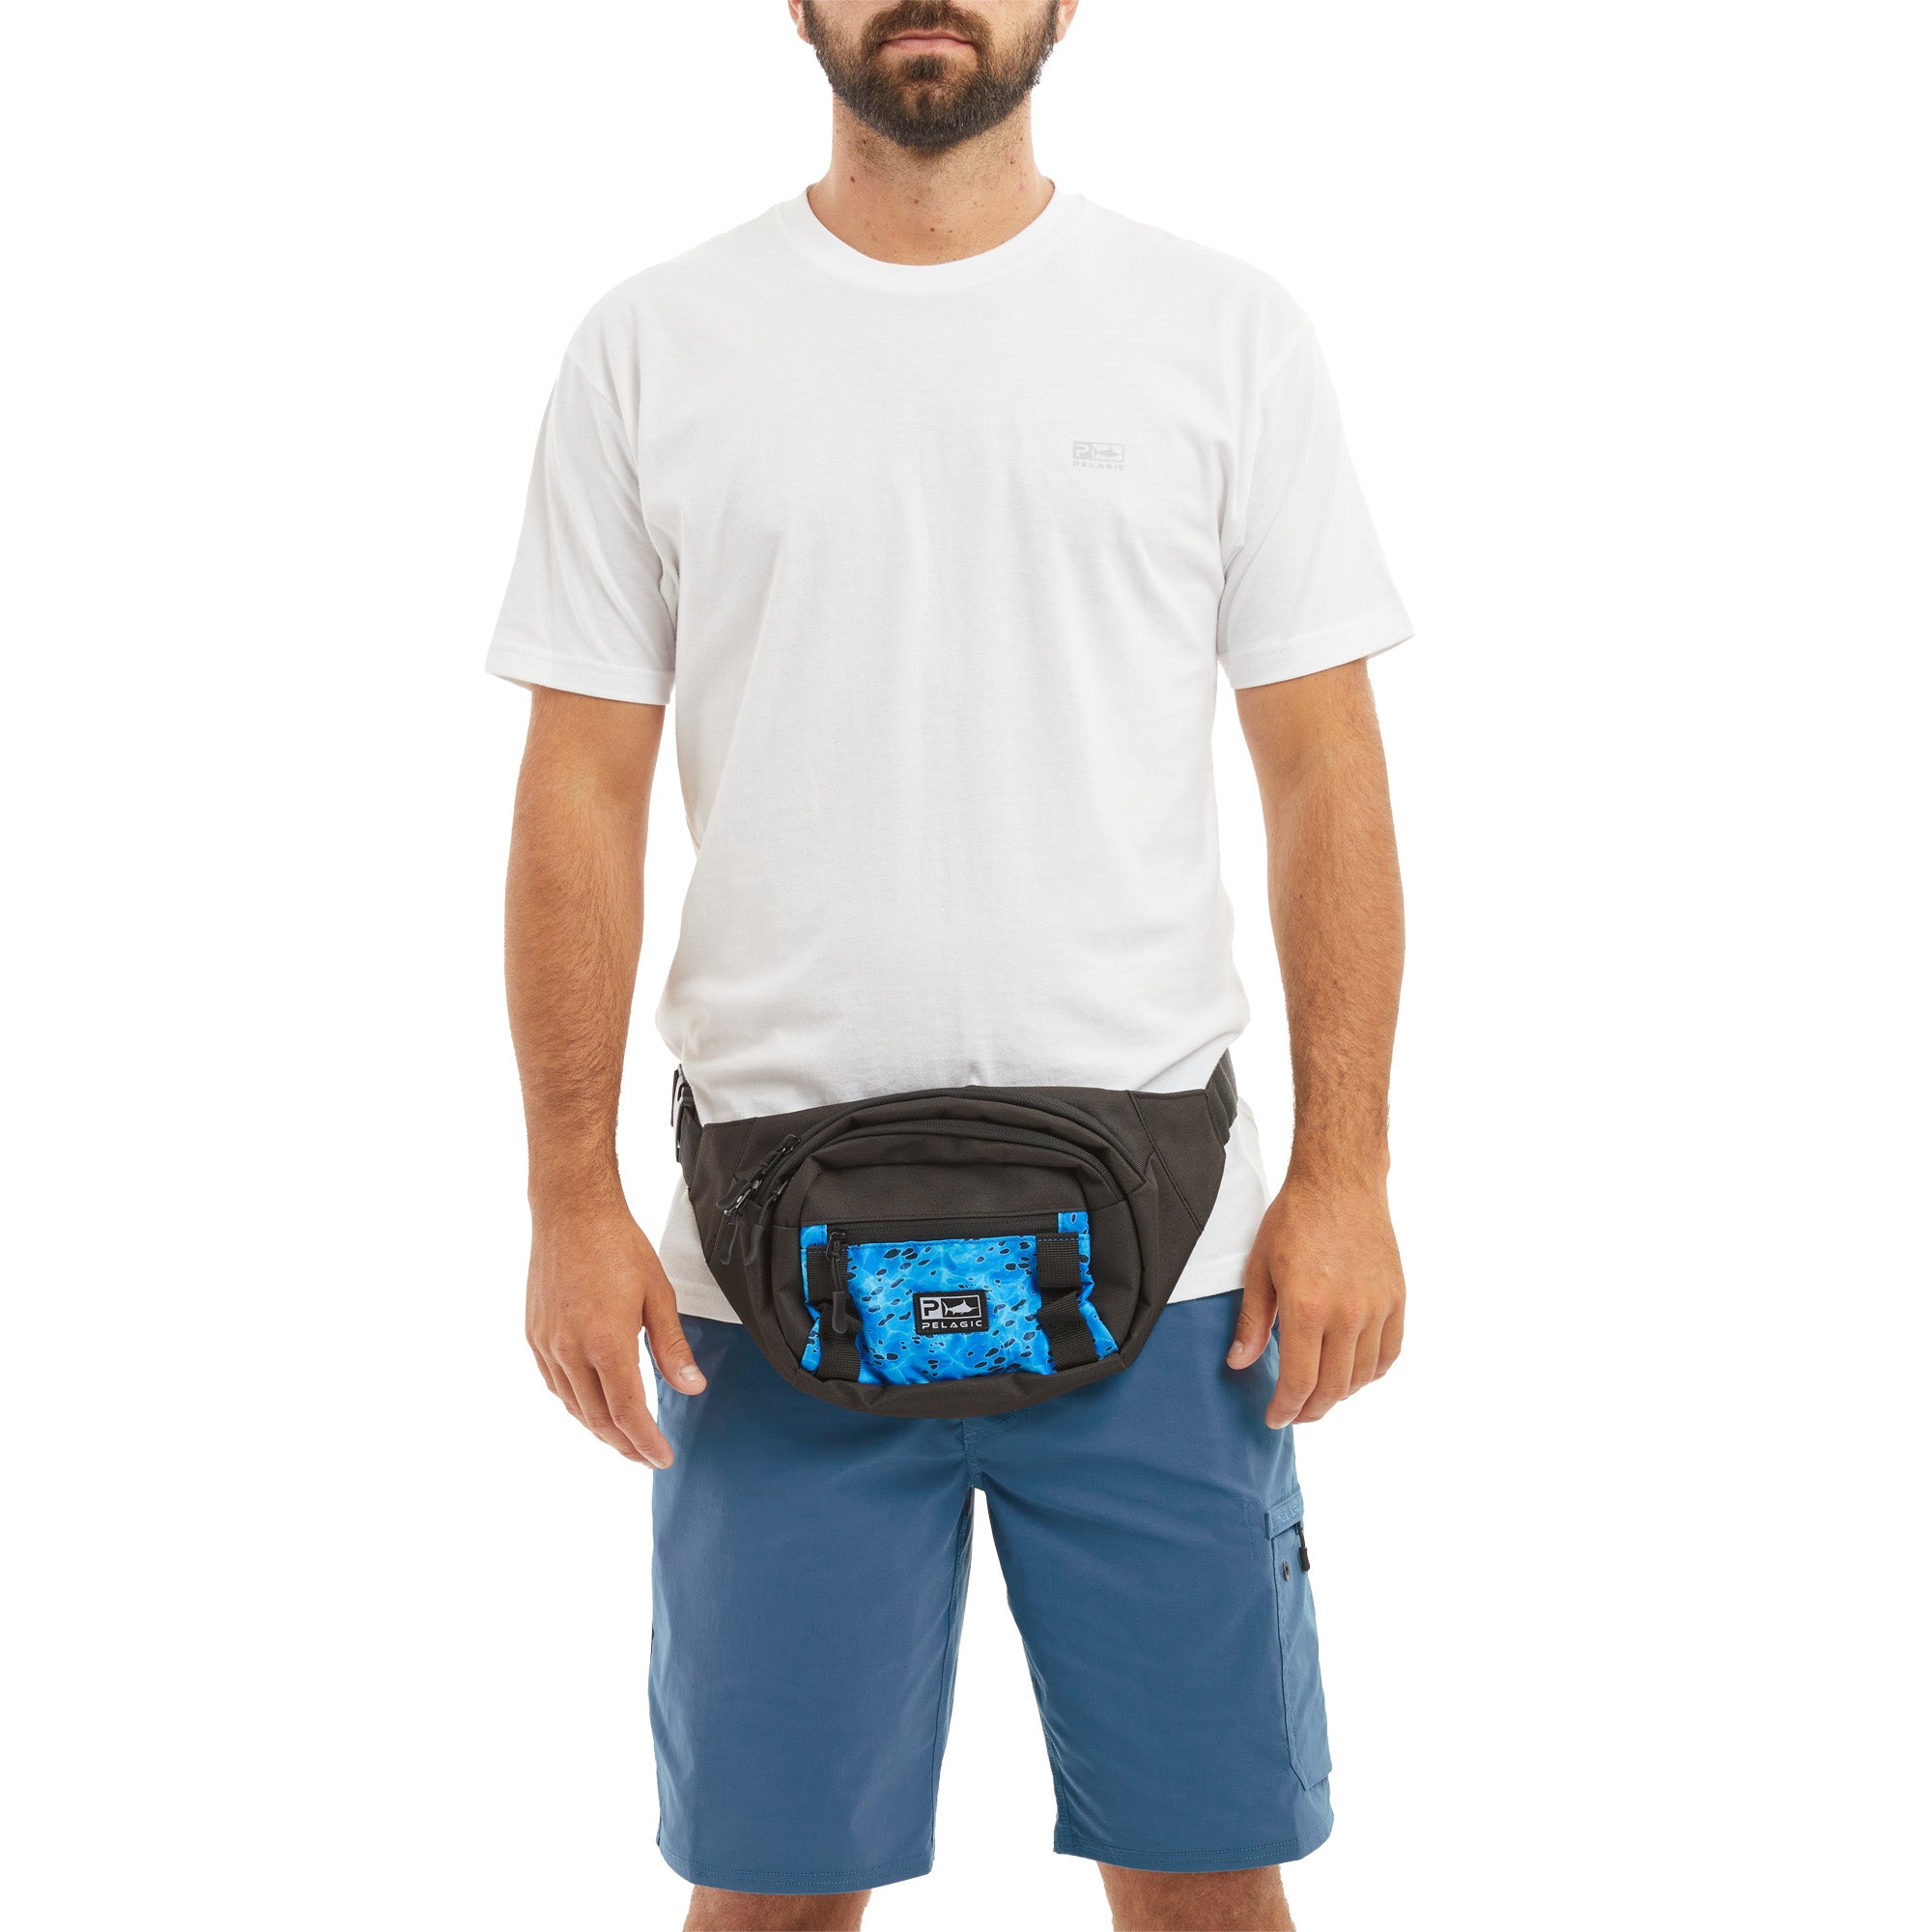 Vikans Fashion Polyester Waist Bag Pouch Fanny Pack with Adjustable Belt  BLK+ Waist Bag Black - Price in India